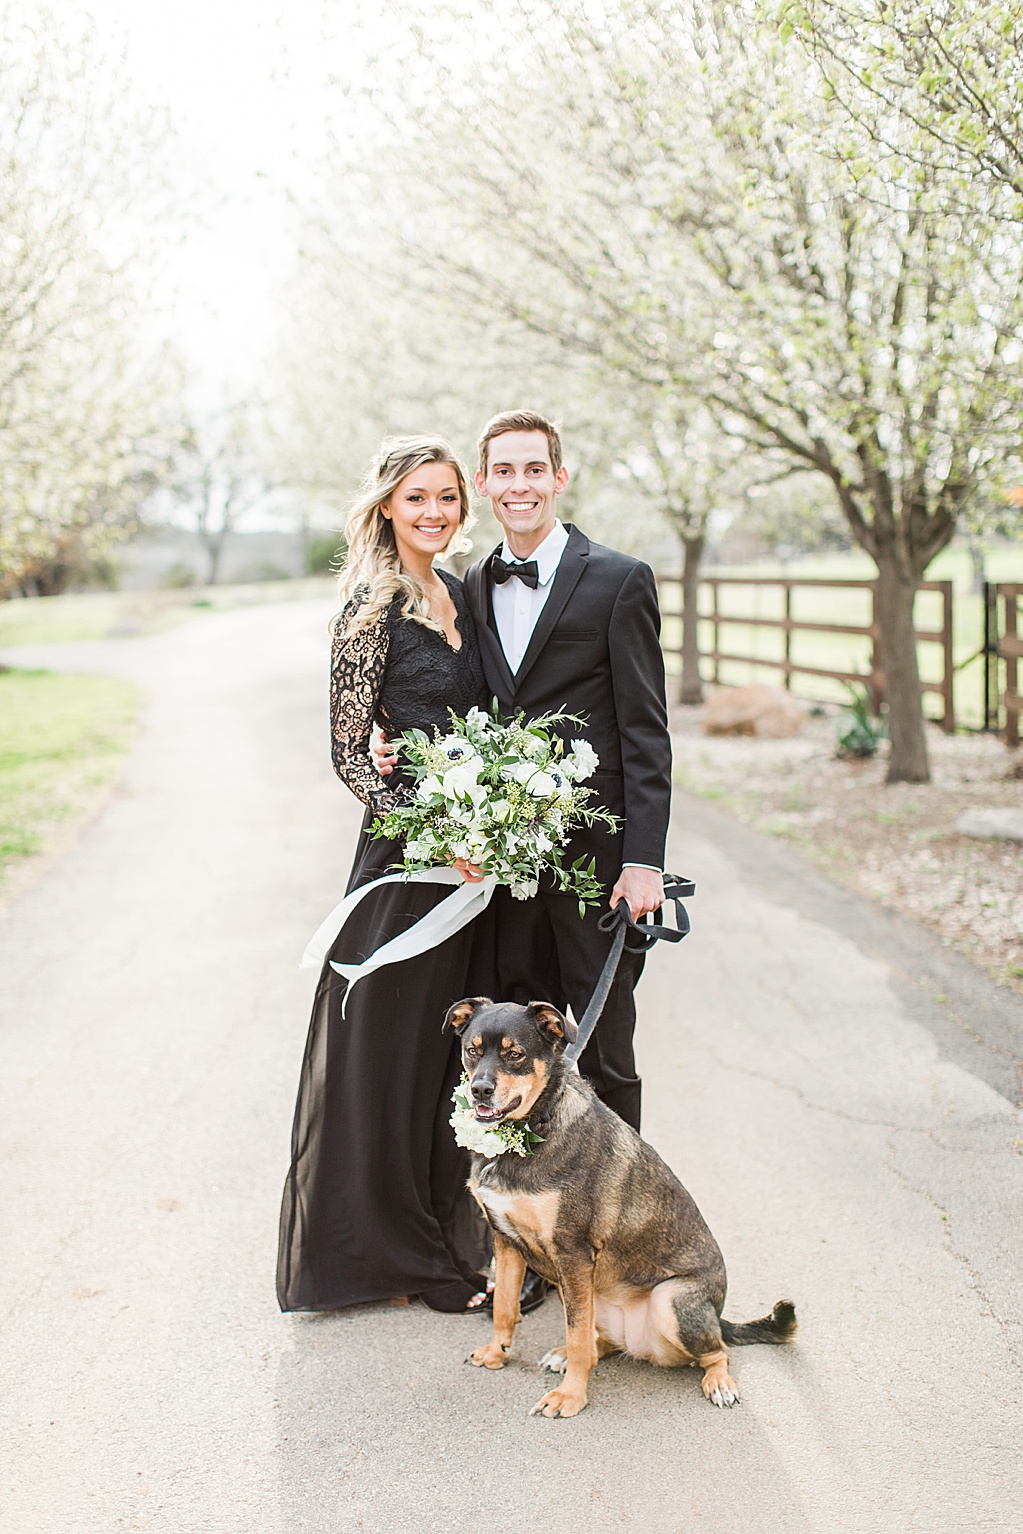 King River Ranch Wedding Venue in Johnson City Engagement Photos in the white Pear blossoms by Allison Jeffers Wedding Photography 0005